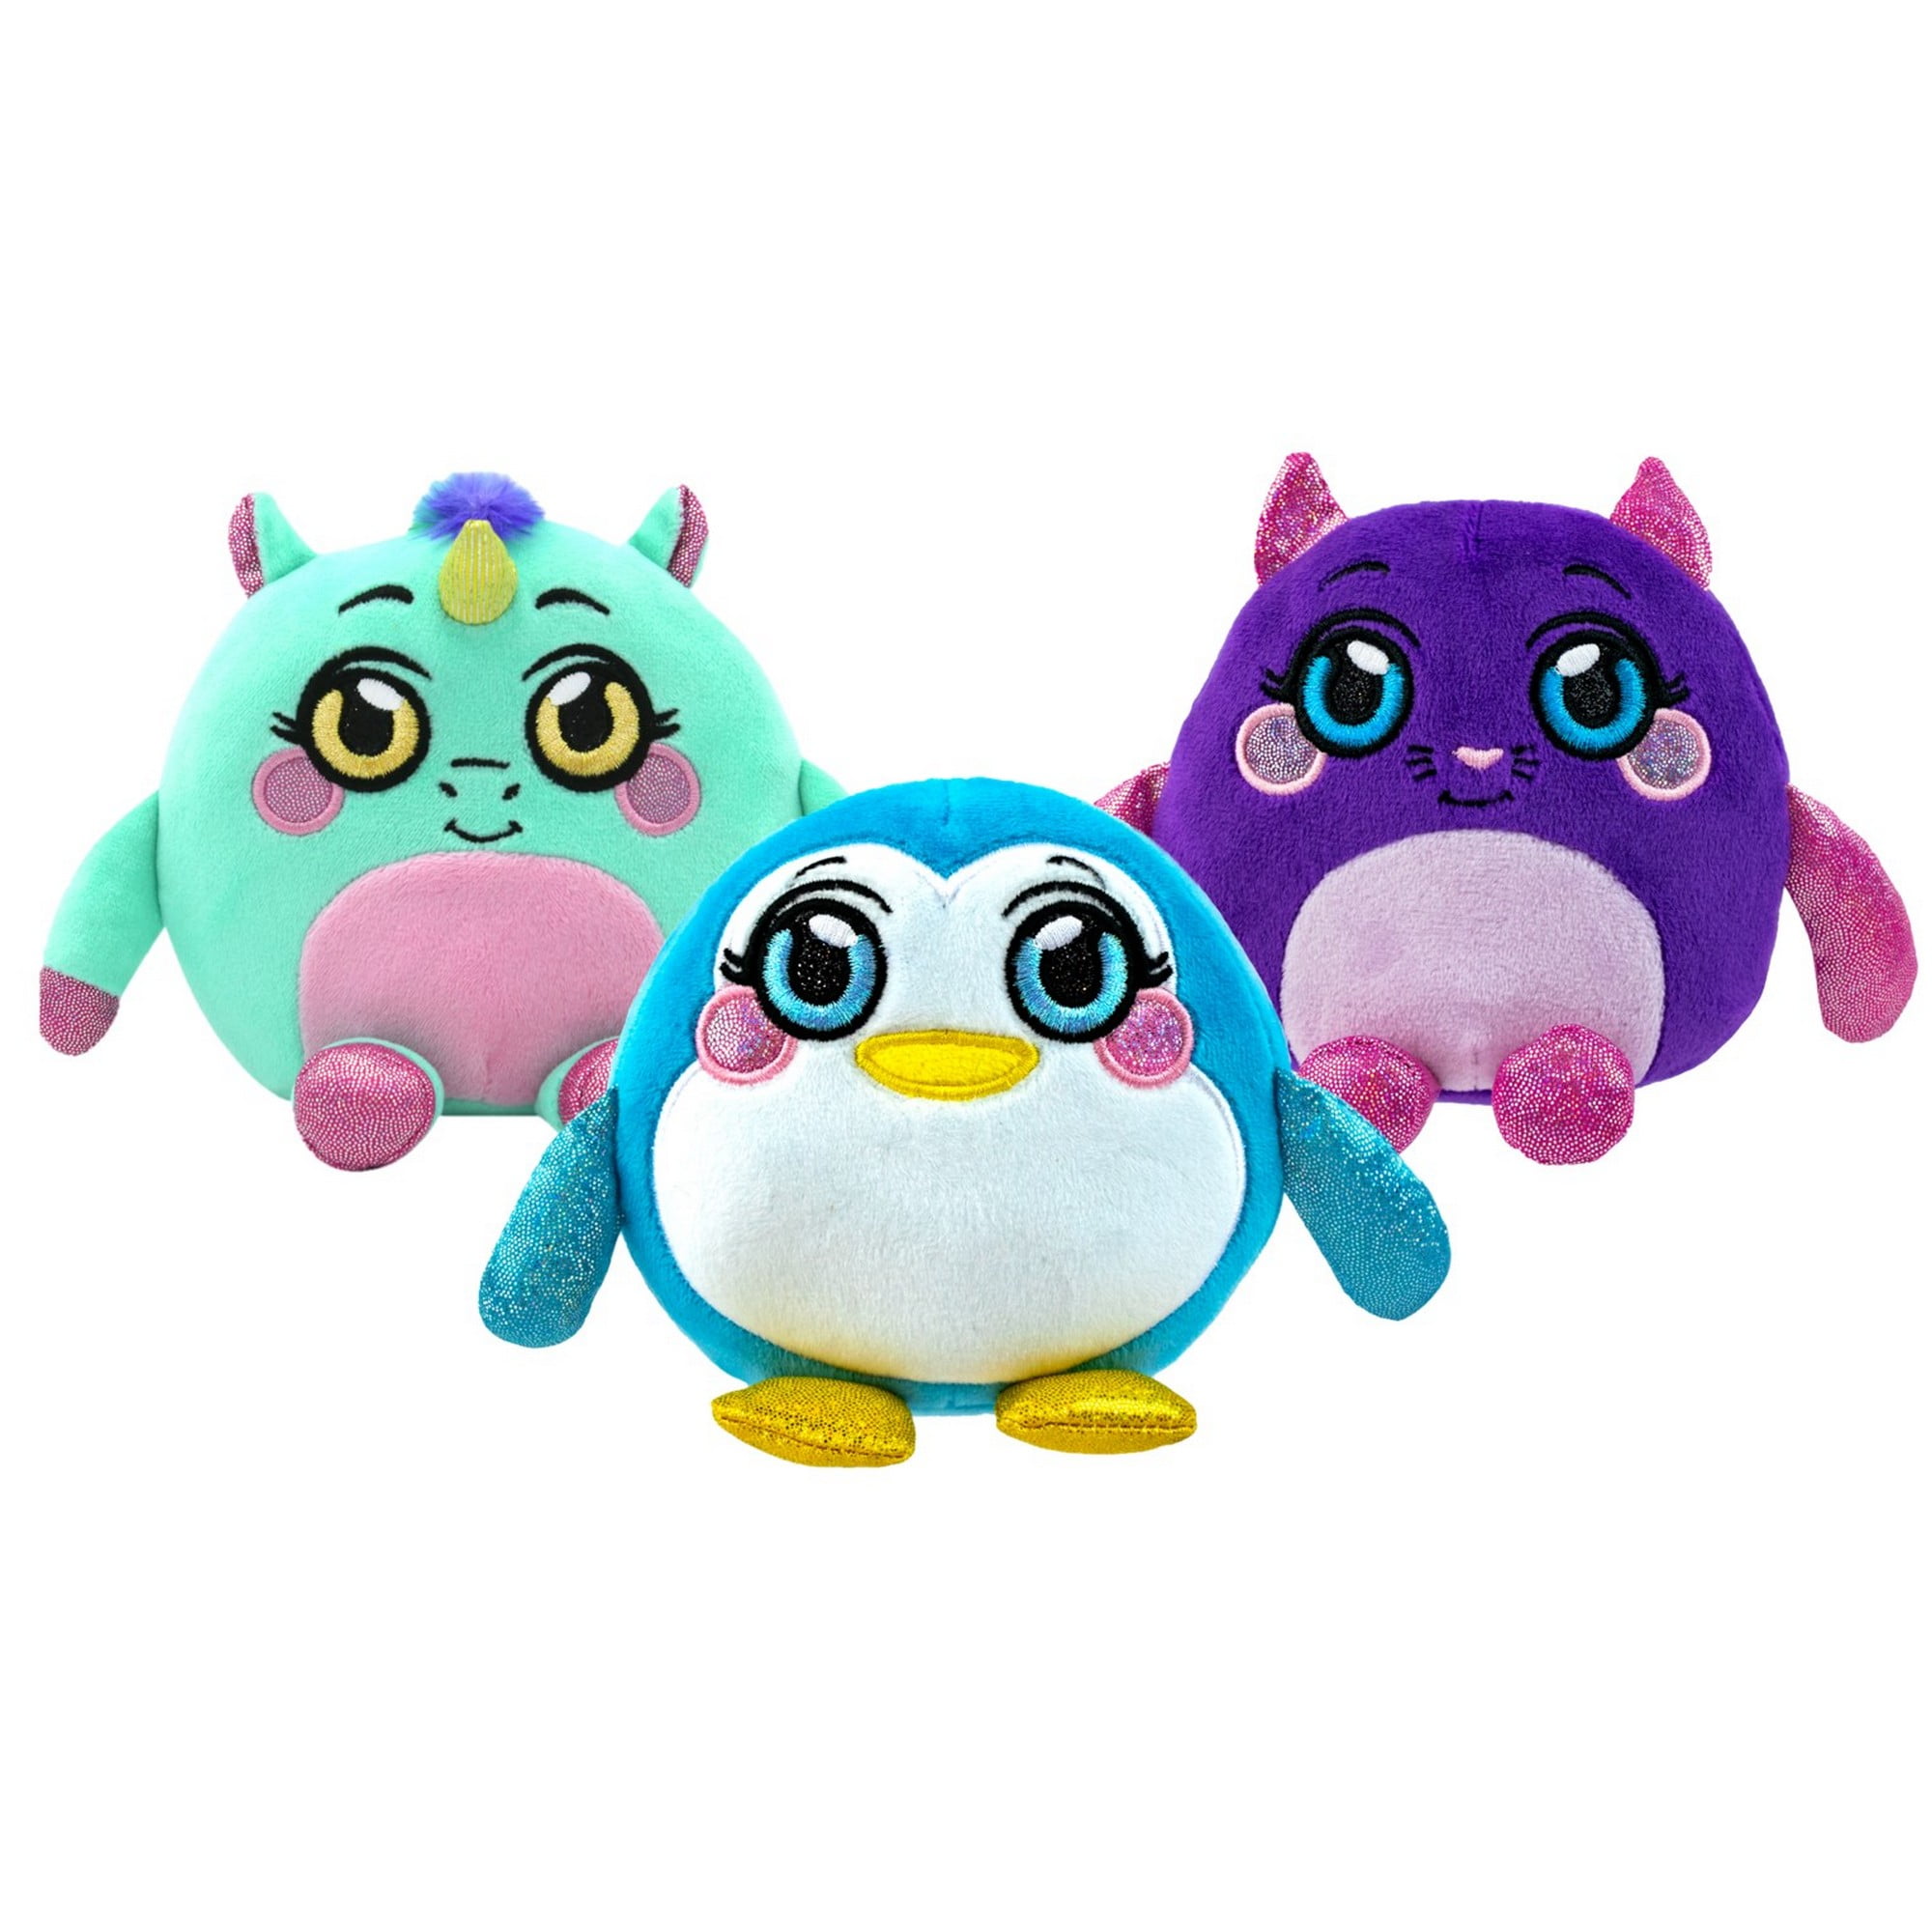 Kids Squeezamals Soft Squishy Pet Plush Scented Stuffed Animals For XMAS Gift 